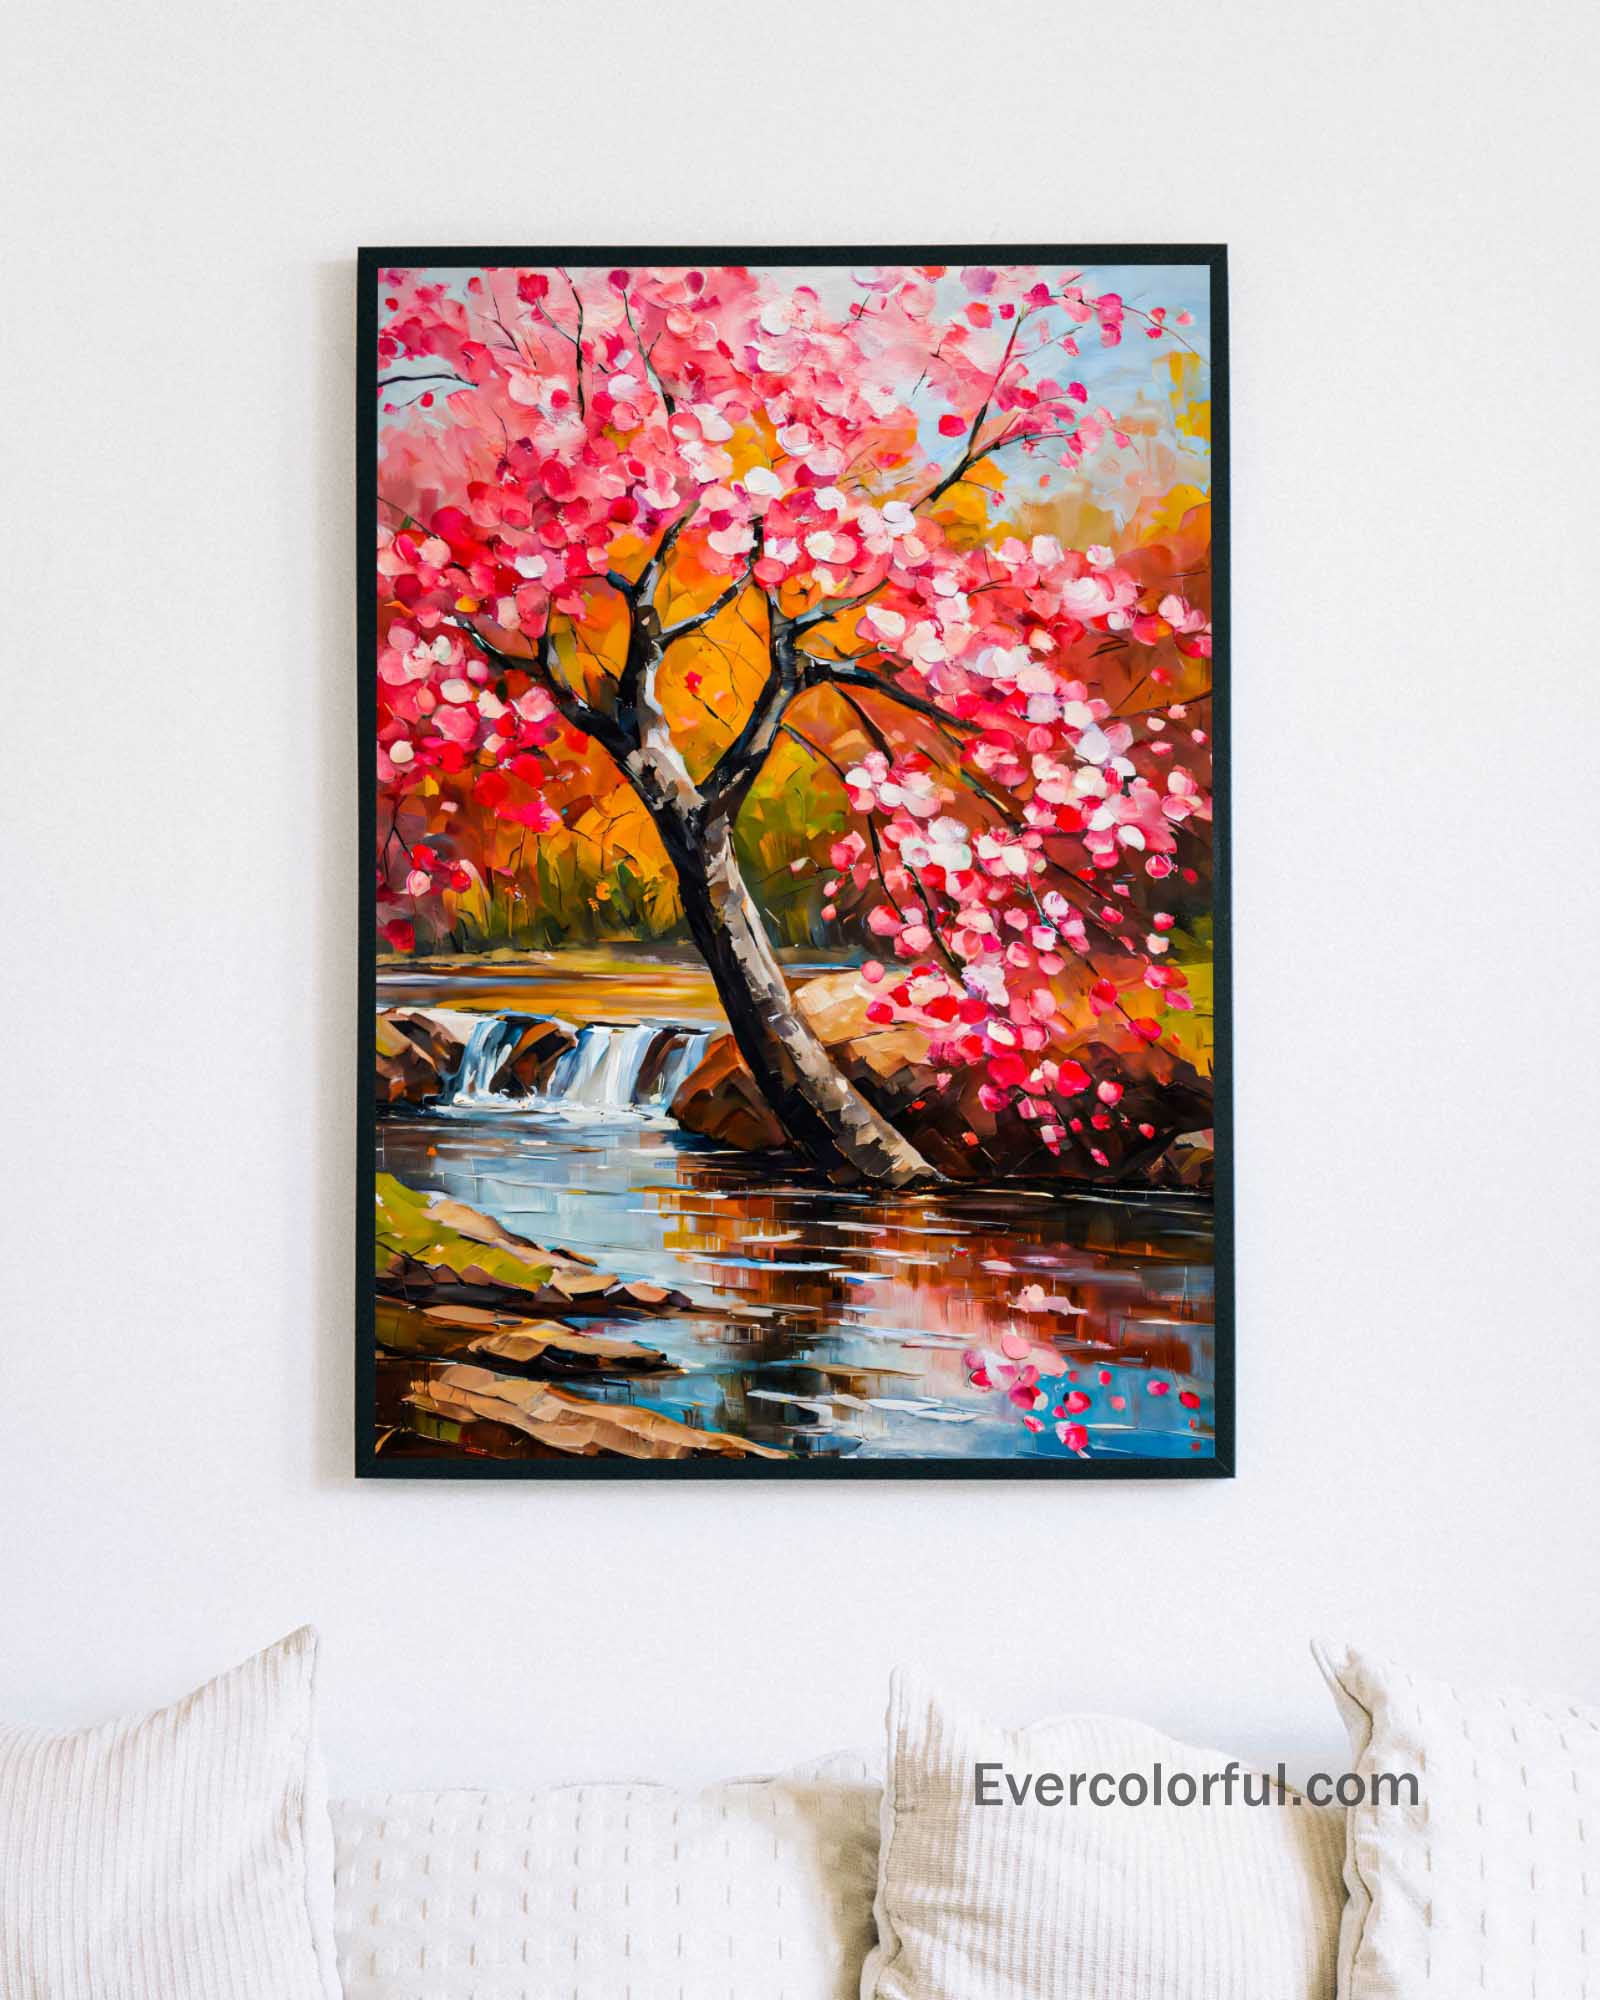 Leaning Sakura - Poster - Ever colorful